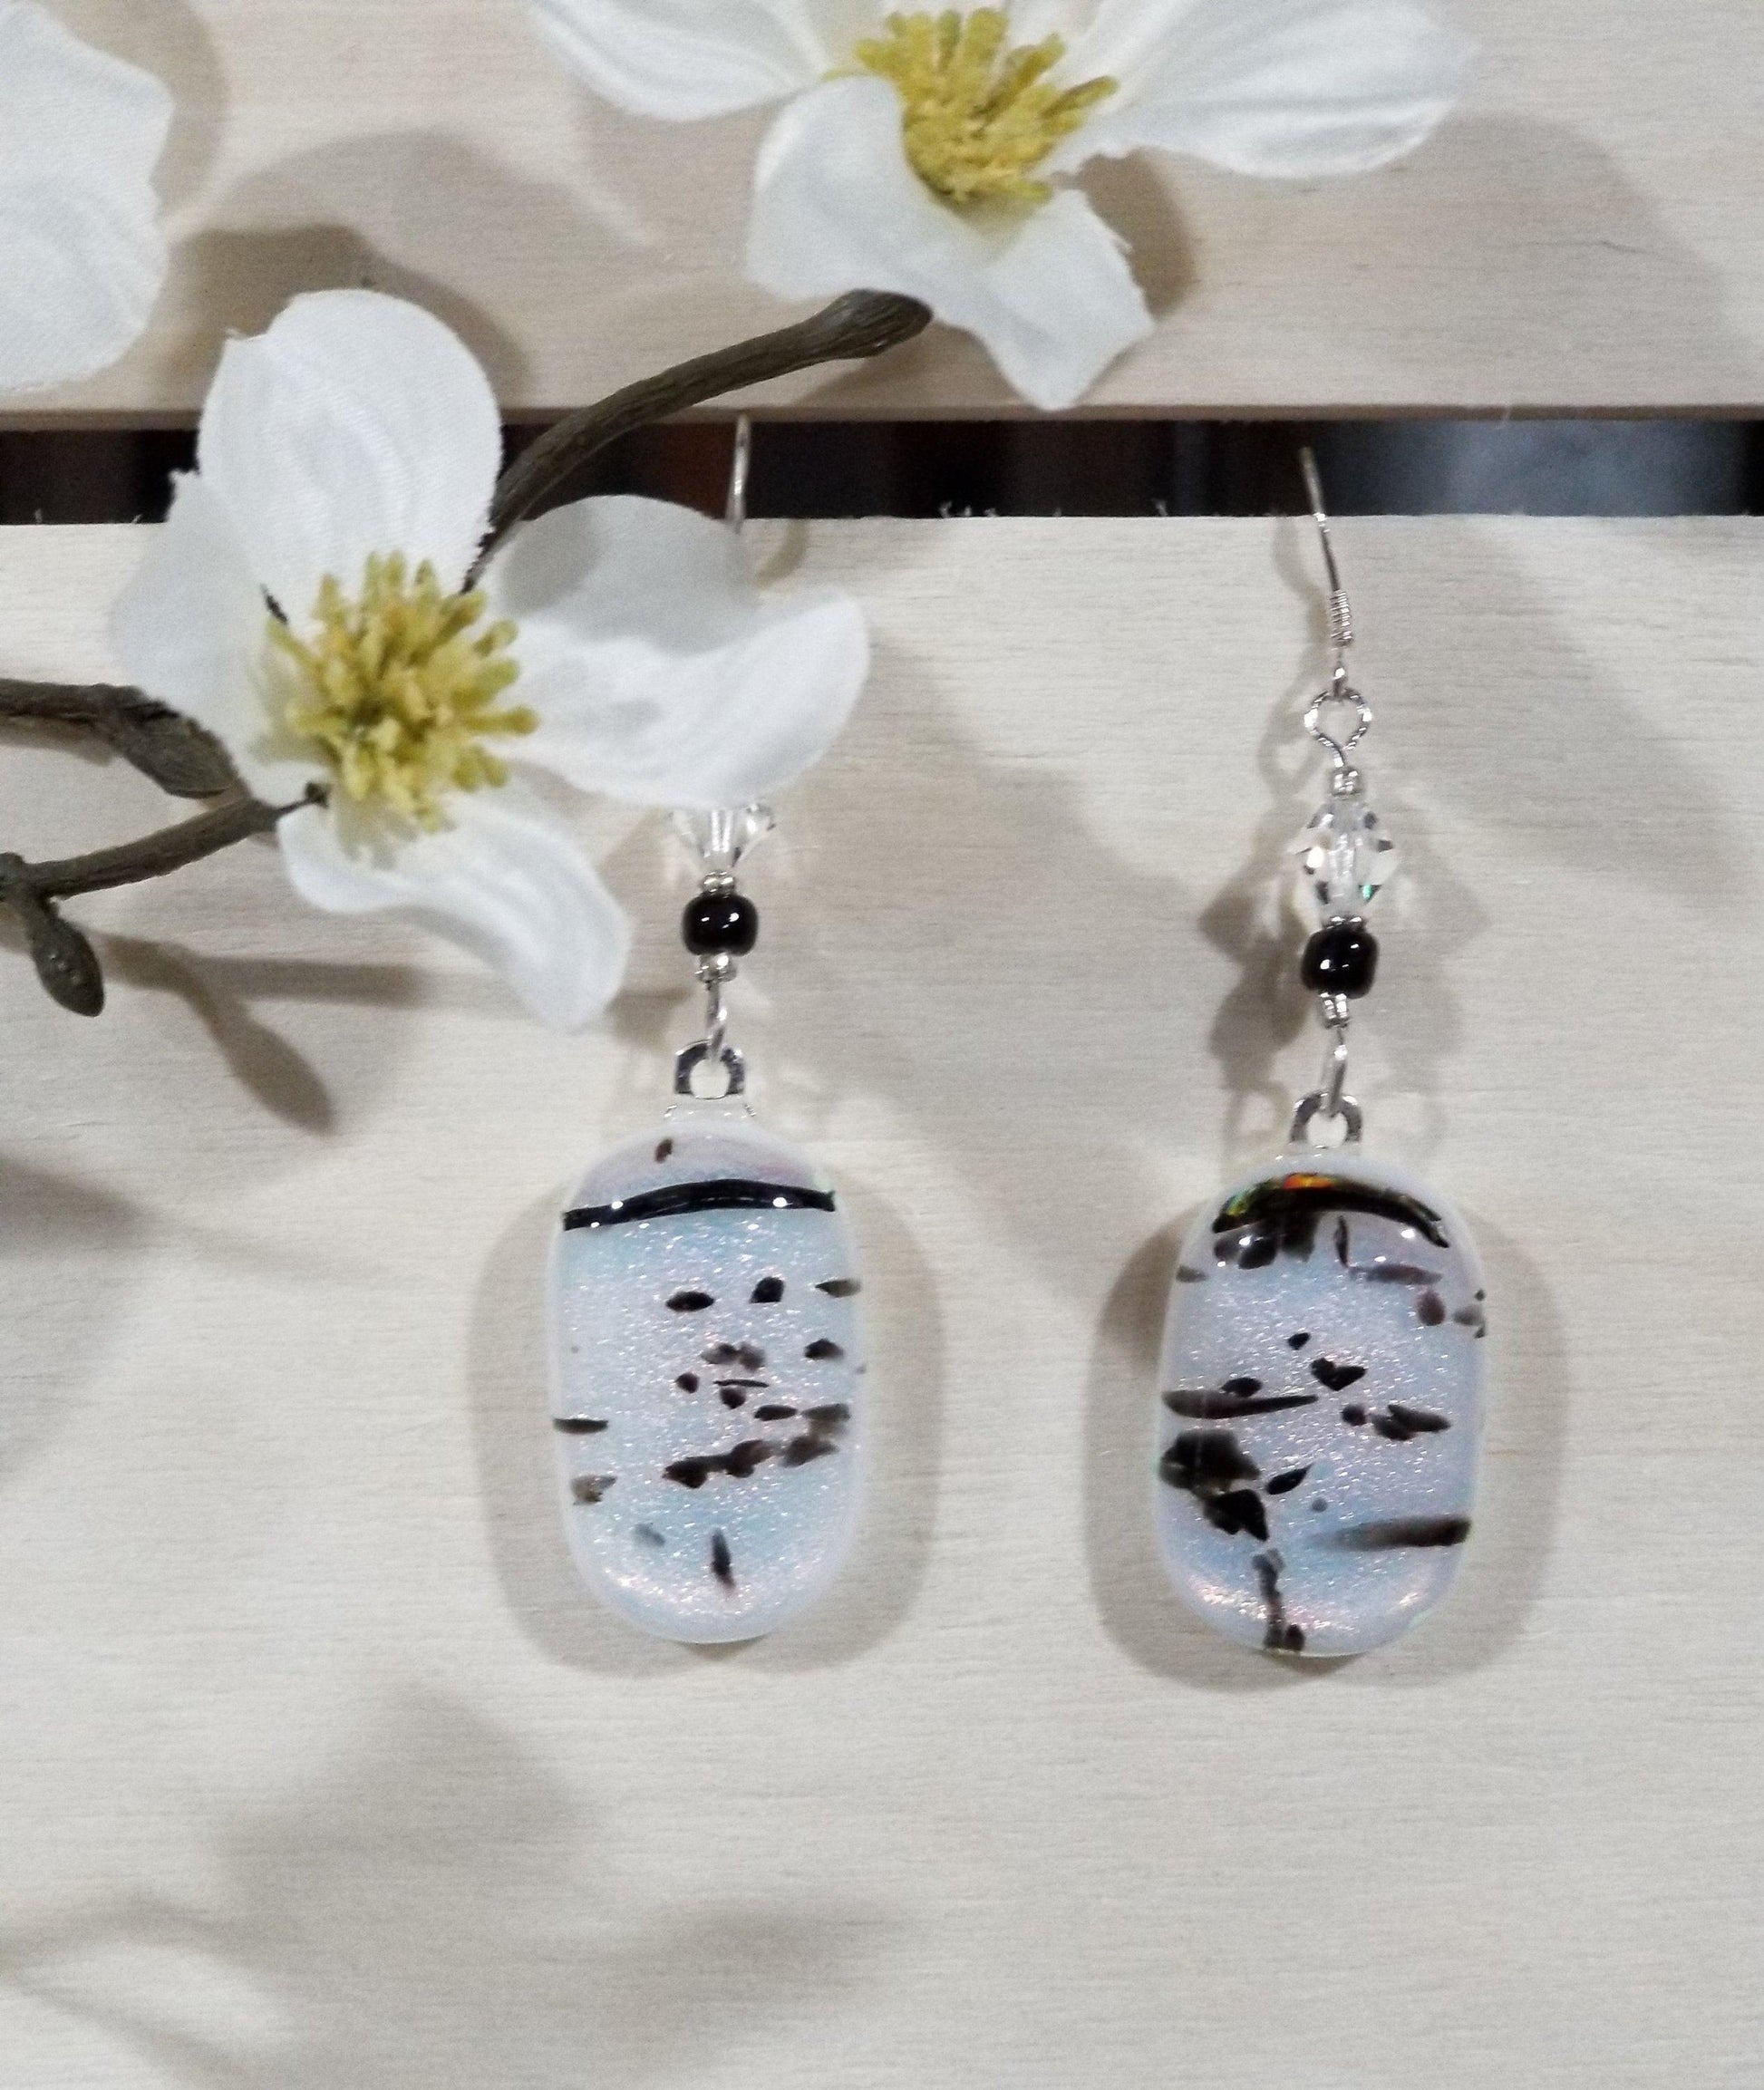 White and Black spotted fused glass jewelry, pierced dangle earrings, silver wire dangle style